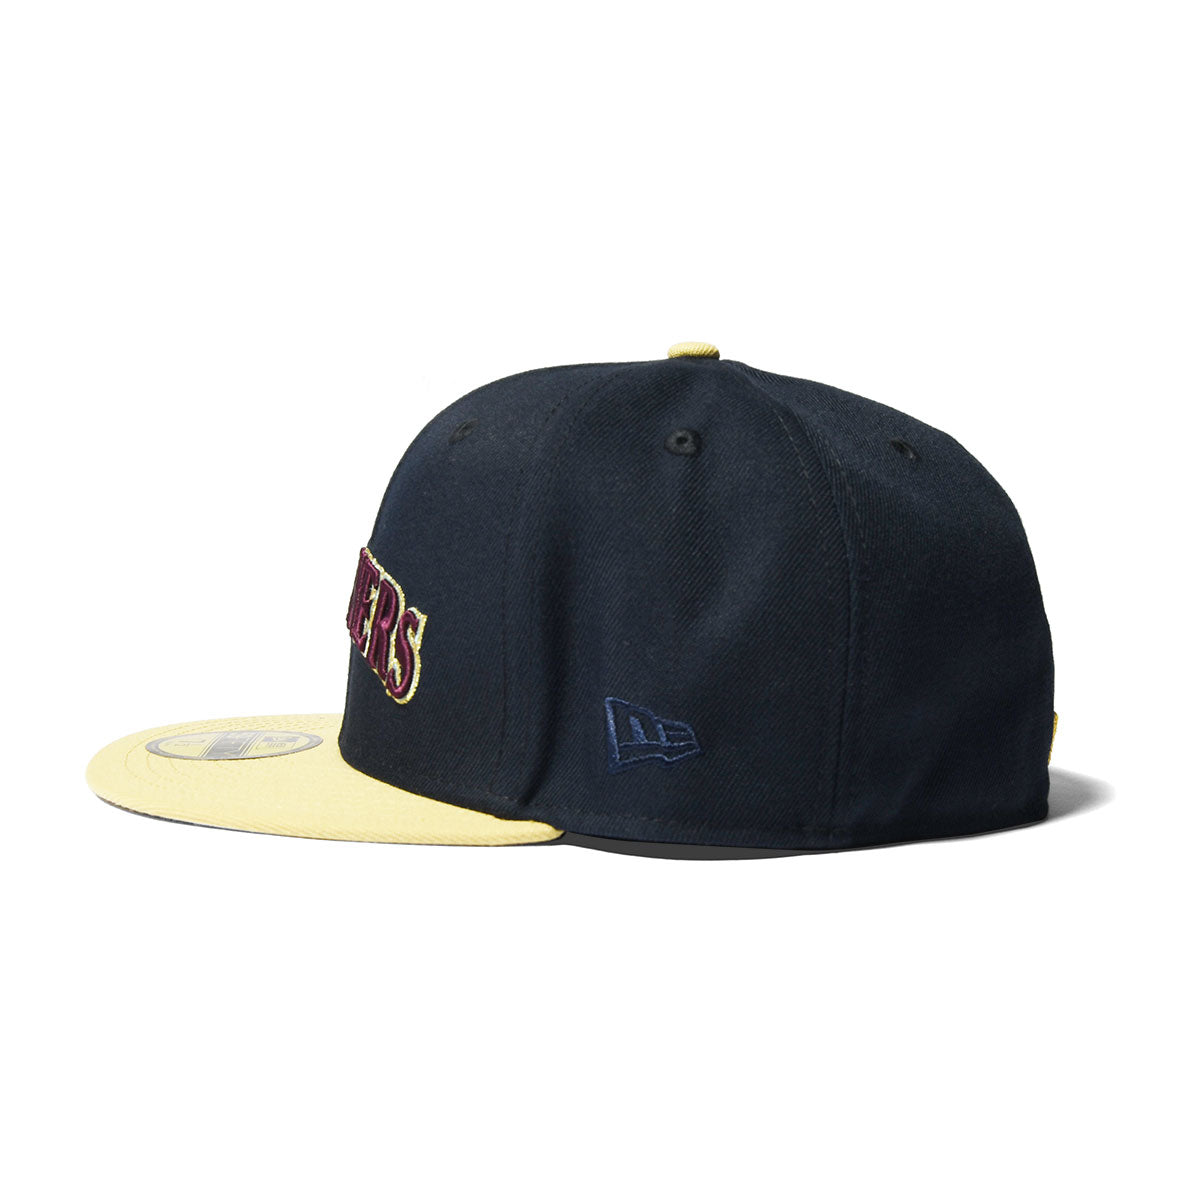 NEW ERA Sesttle Mariners - 2023 ALL STAR GAME 59FIFTY【NE023】